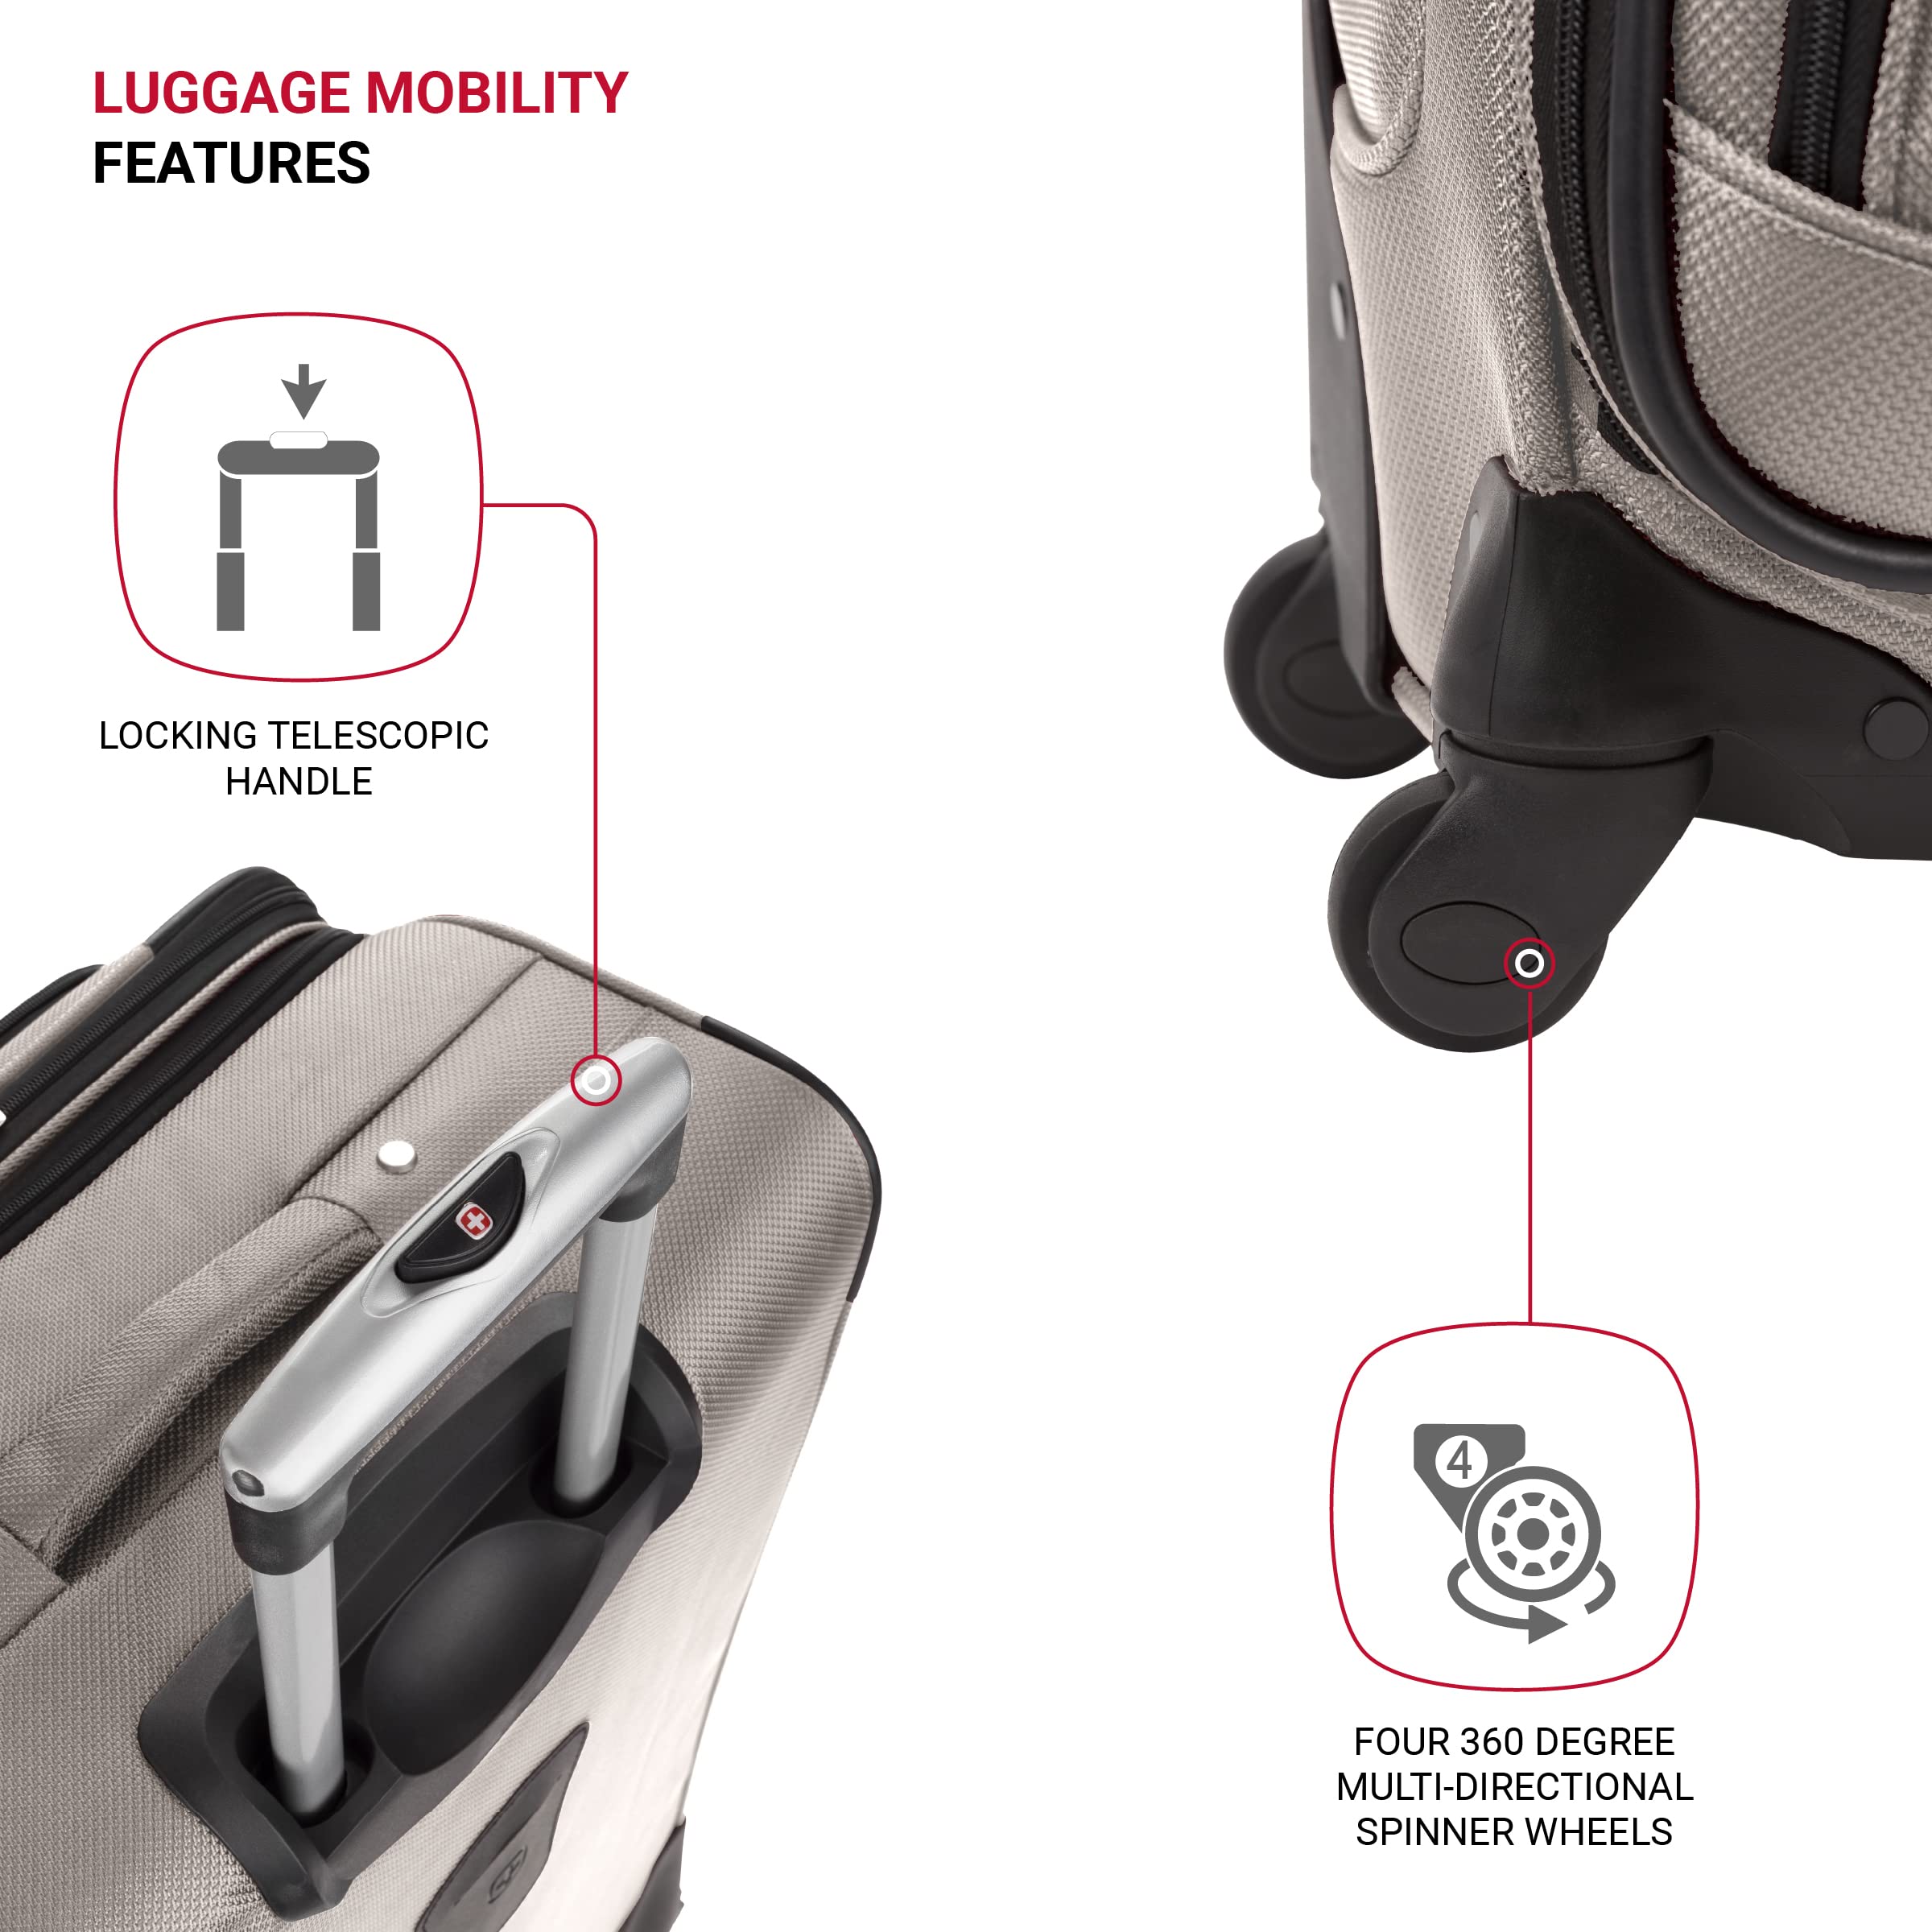 SwissGear Sion Softside Expandable Roller Luggage, Pewter, 3 Piece Set (21/25/27)